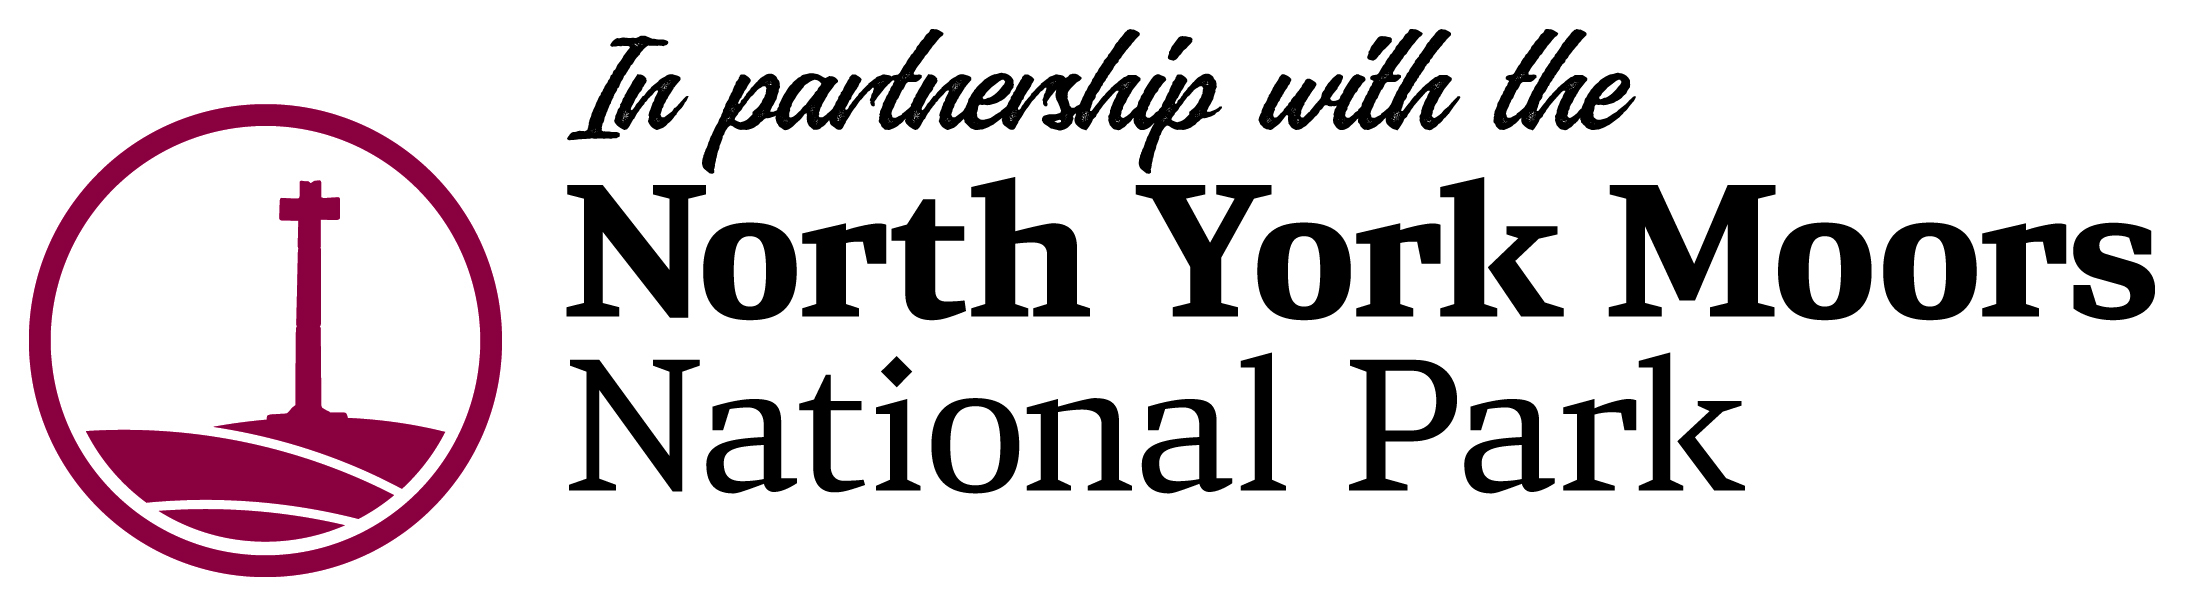 In partnership with NYMNP